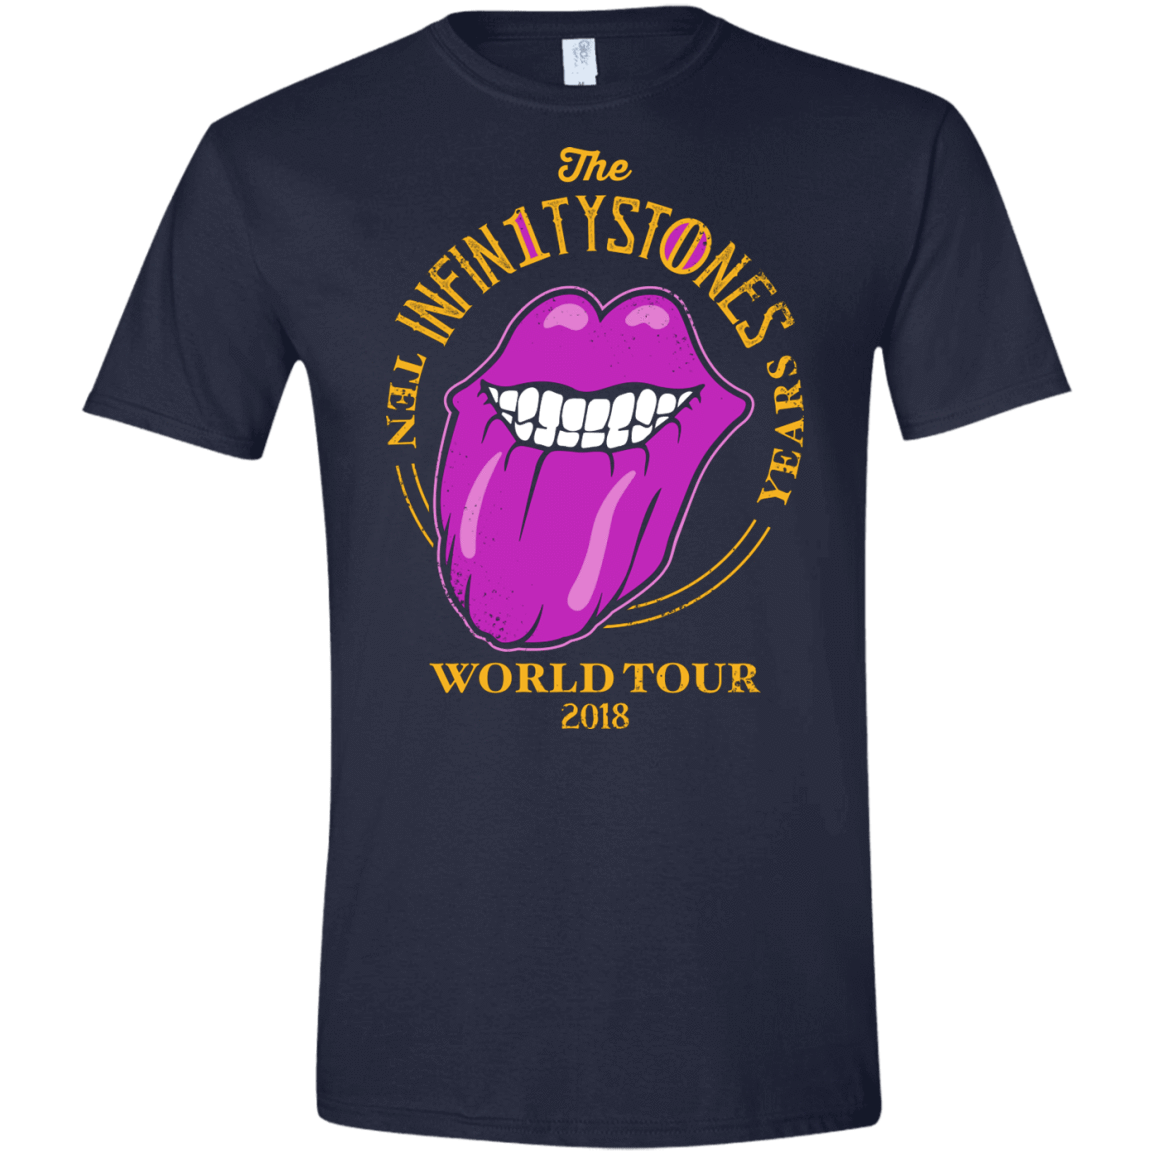 T-Shirts Navy / X-Small Stones World Tour Men's Semi-Fitted Softstyle